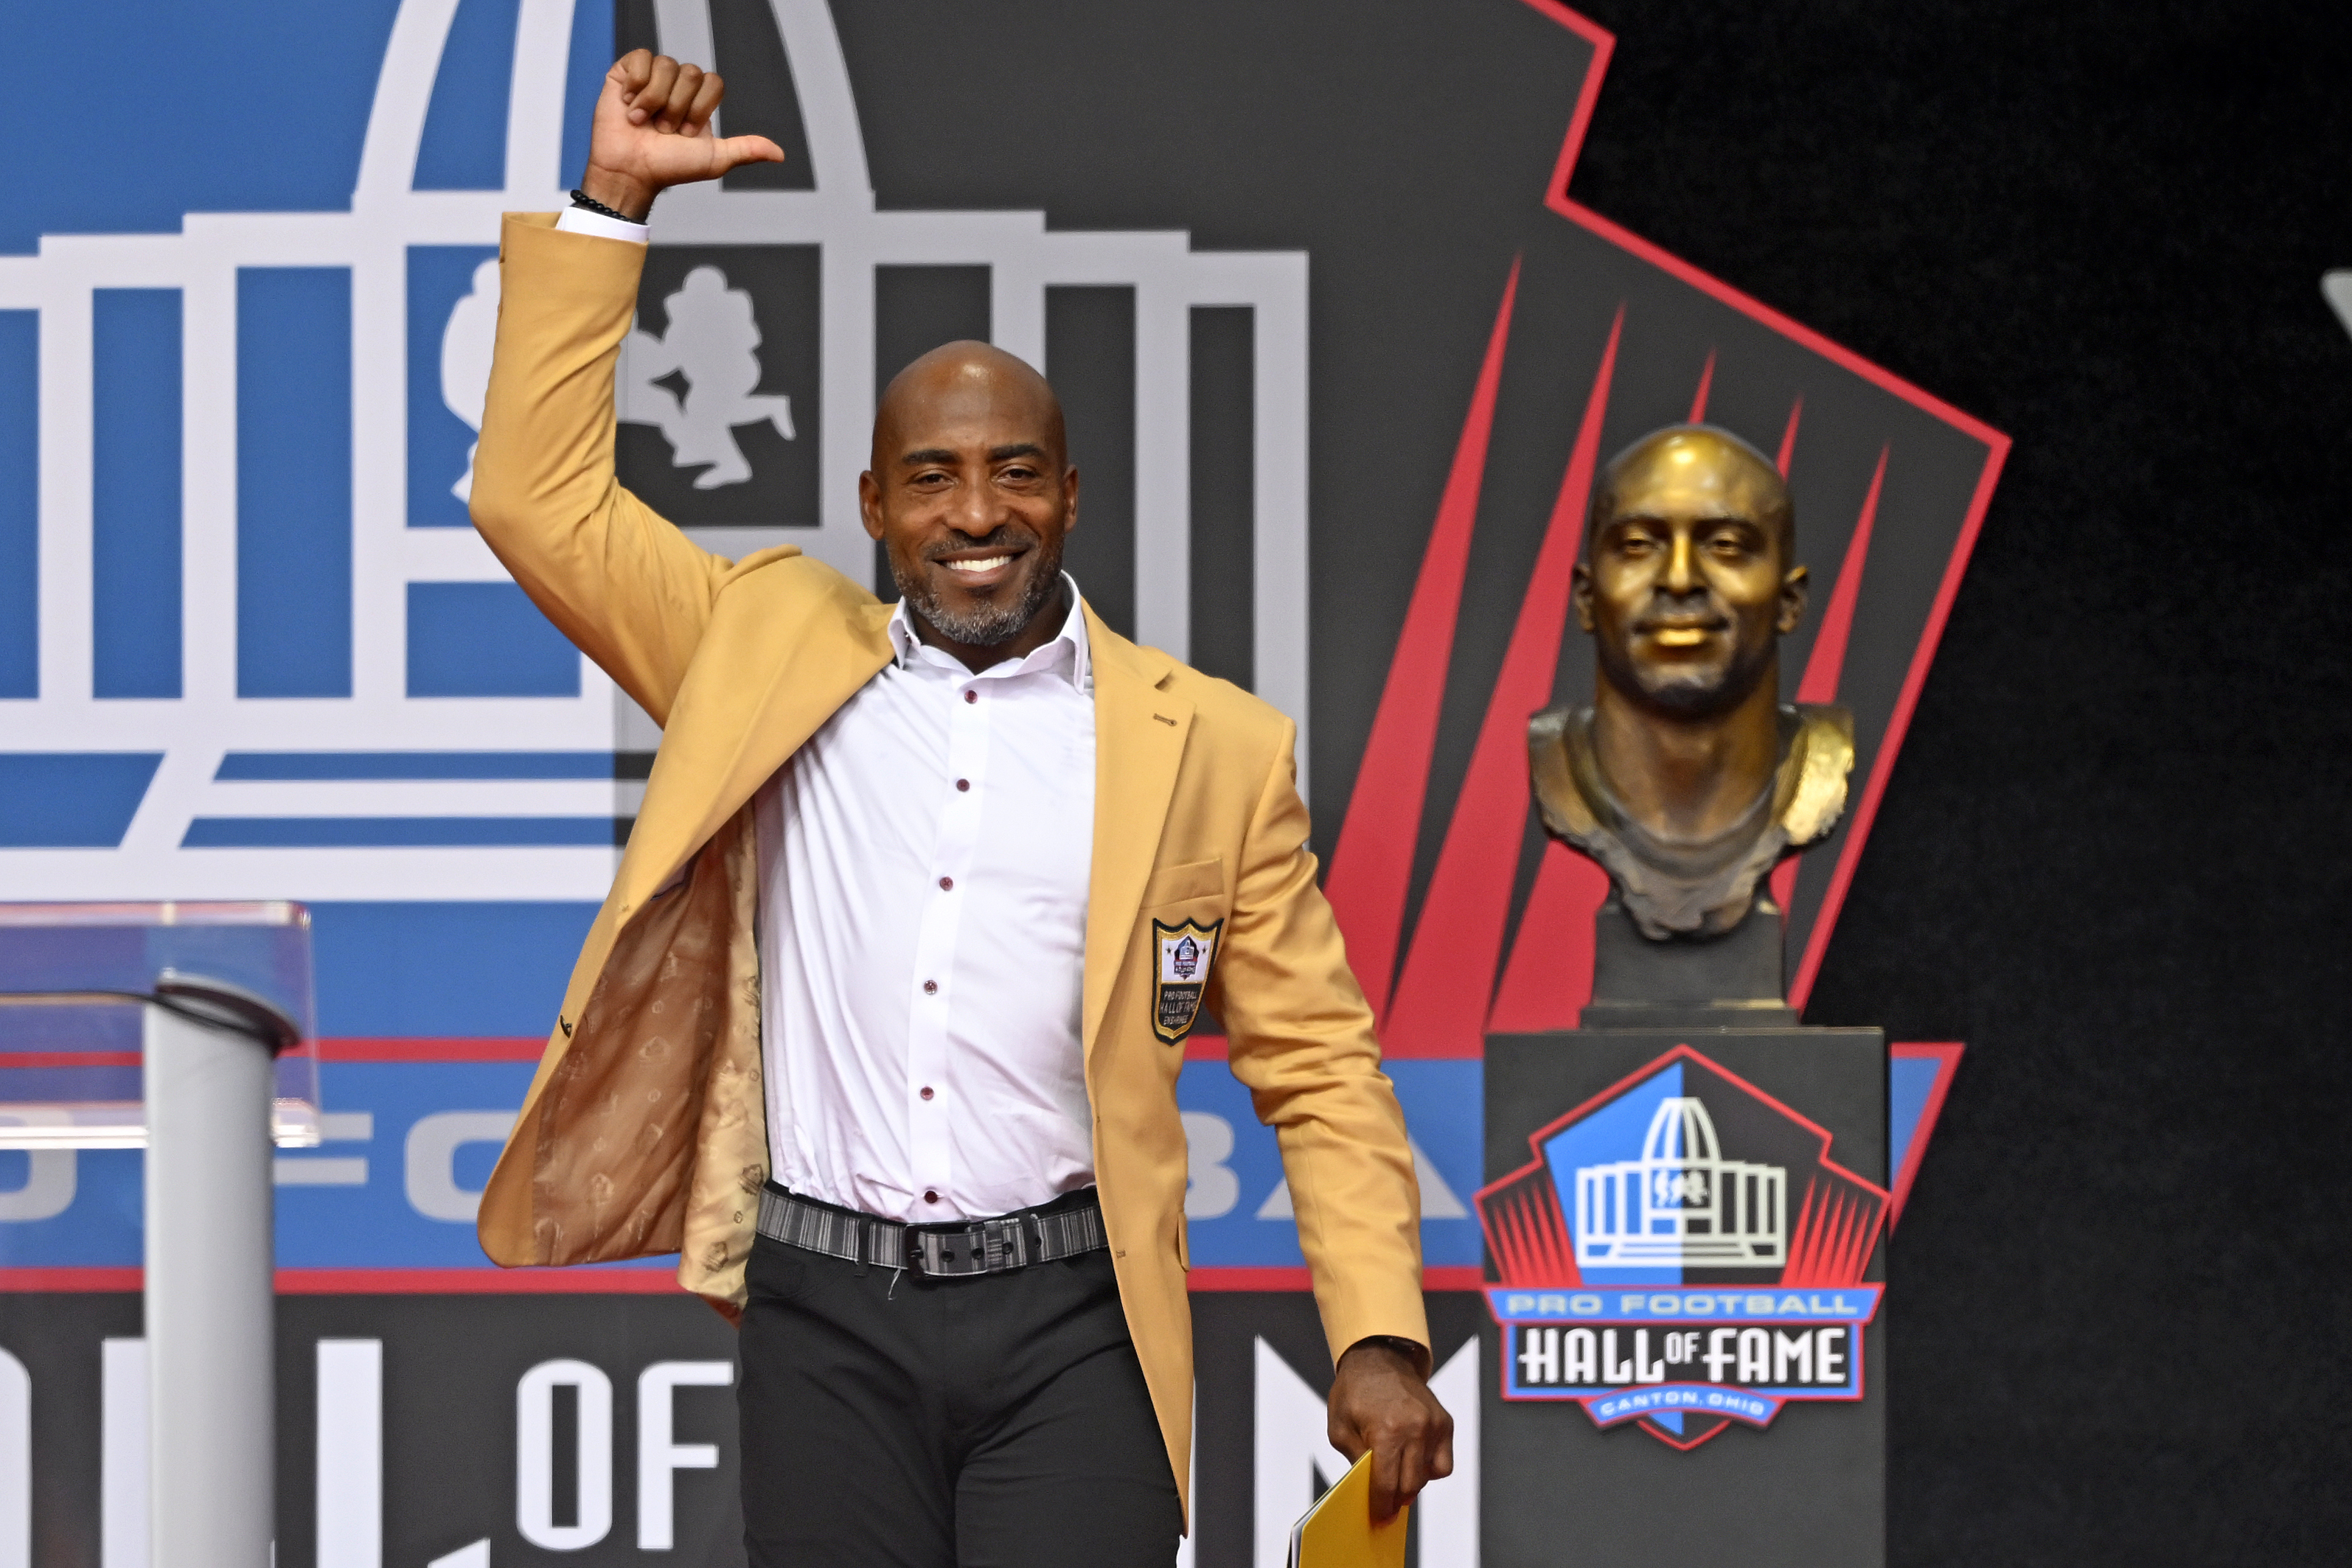 Tiki Barber will be by his twin Ronde's side in Canton